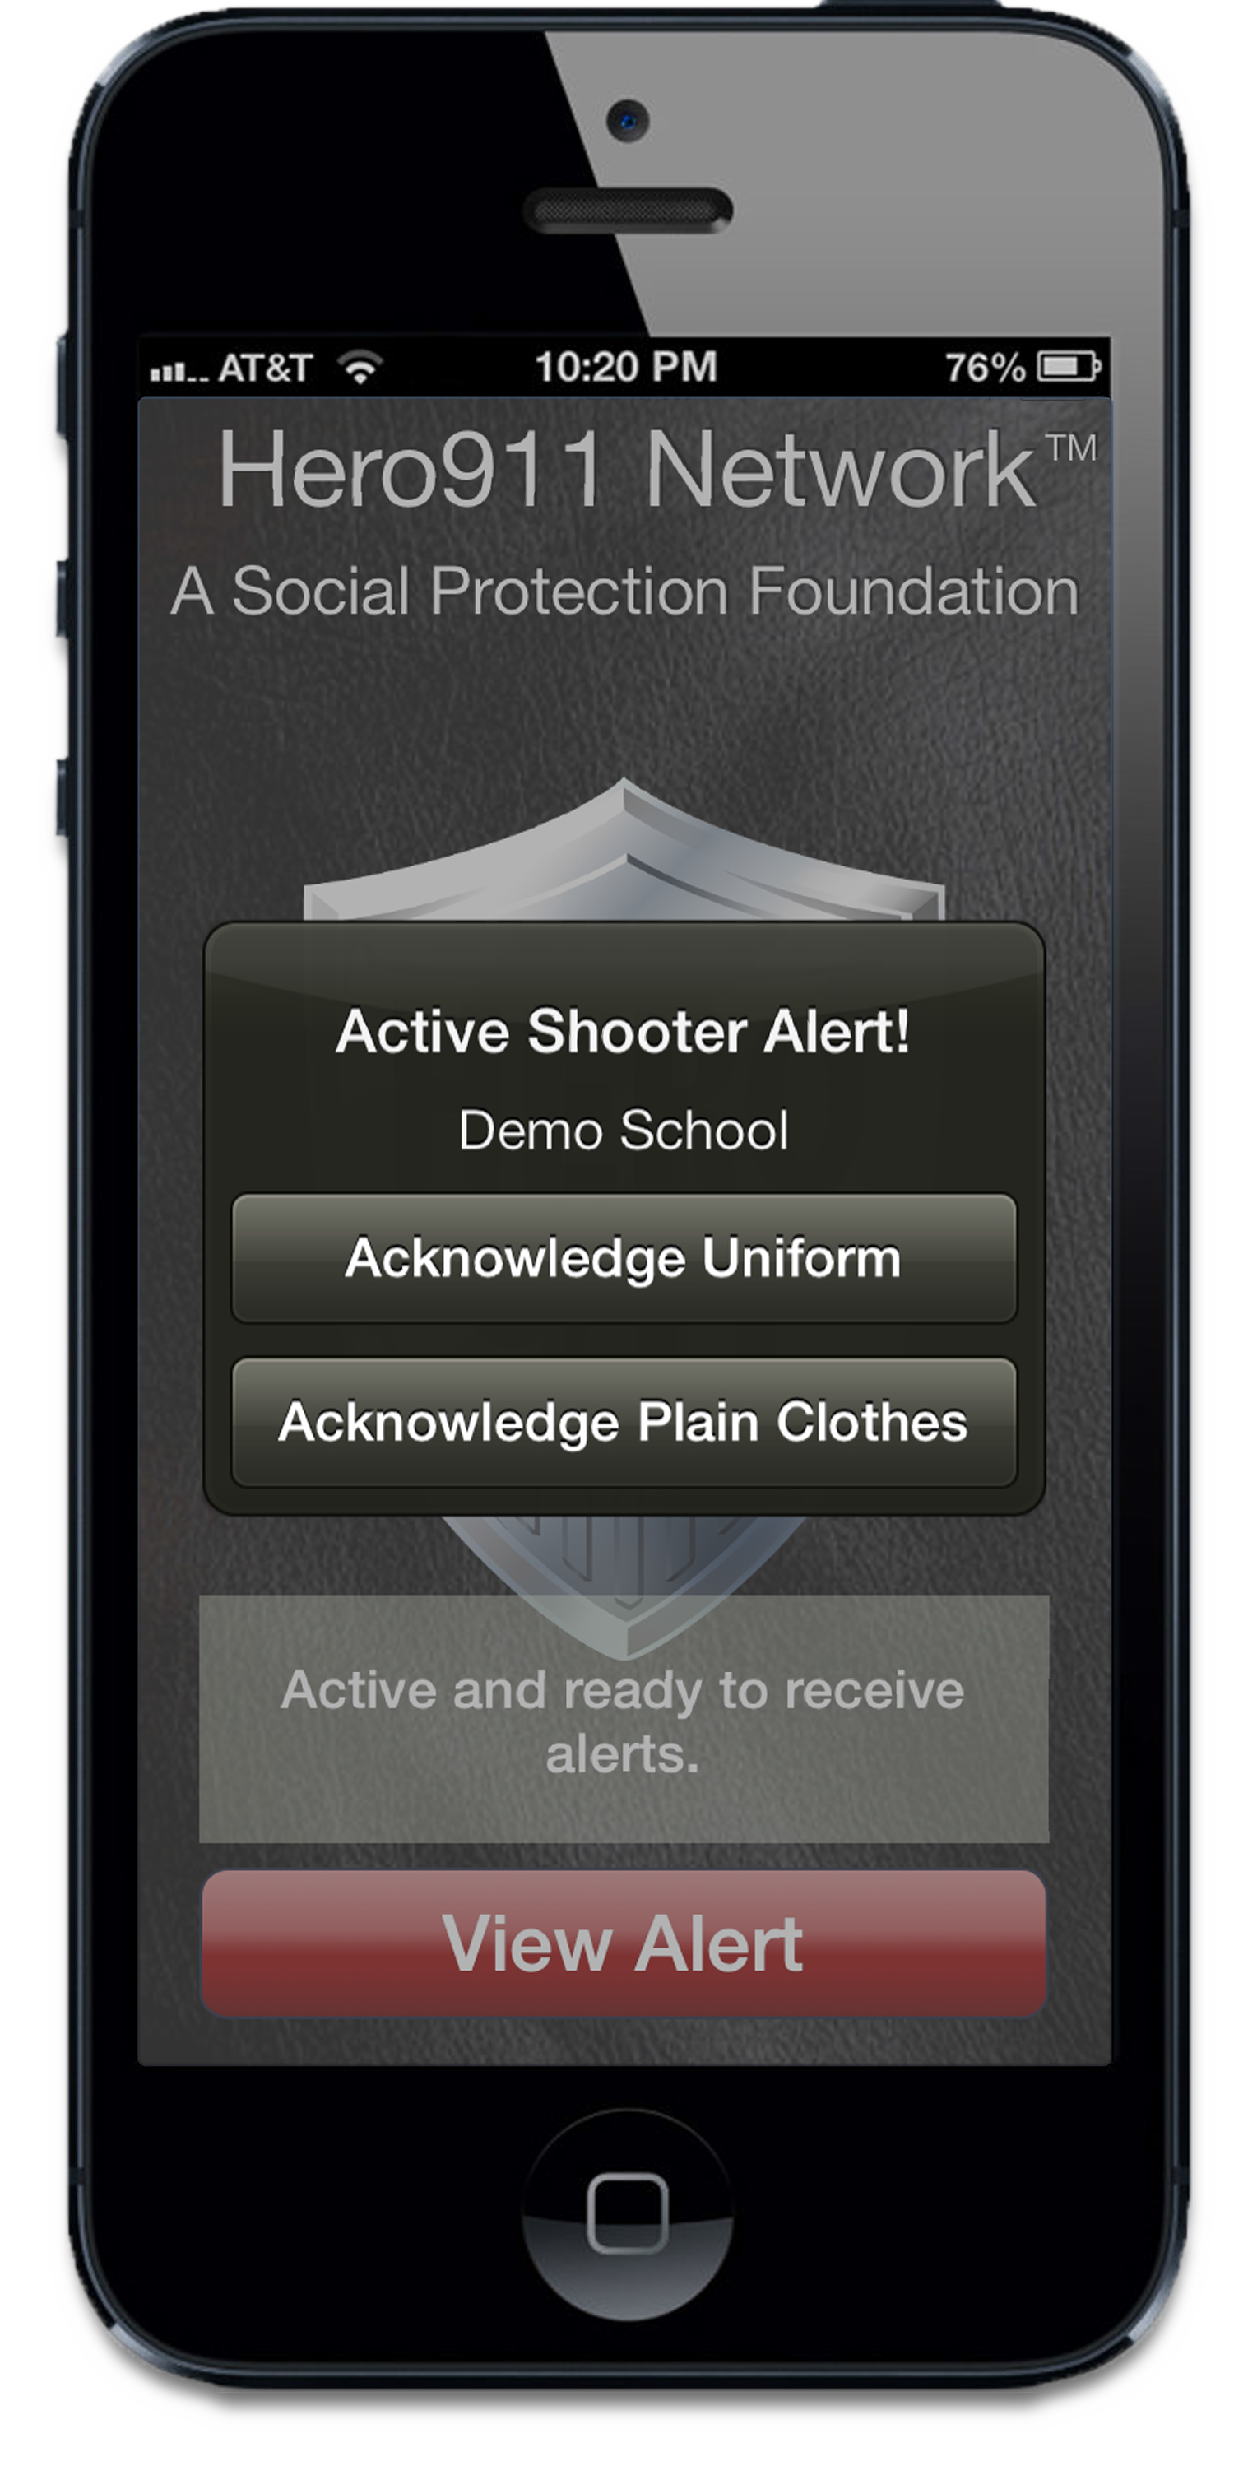 photo of the Hero911 Netwrok on a iPhone showing alerts